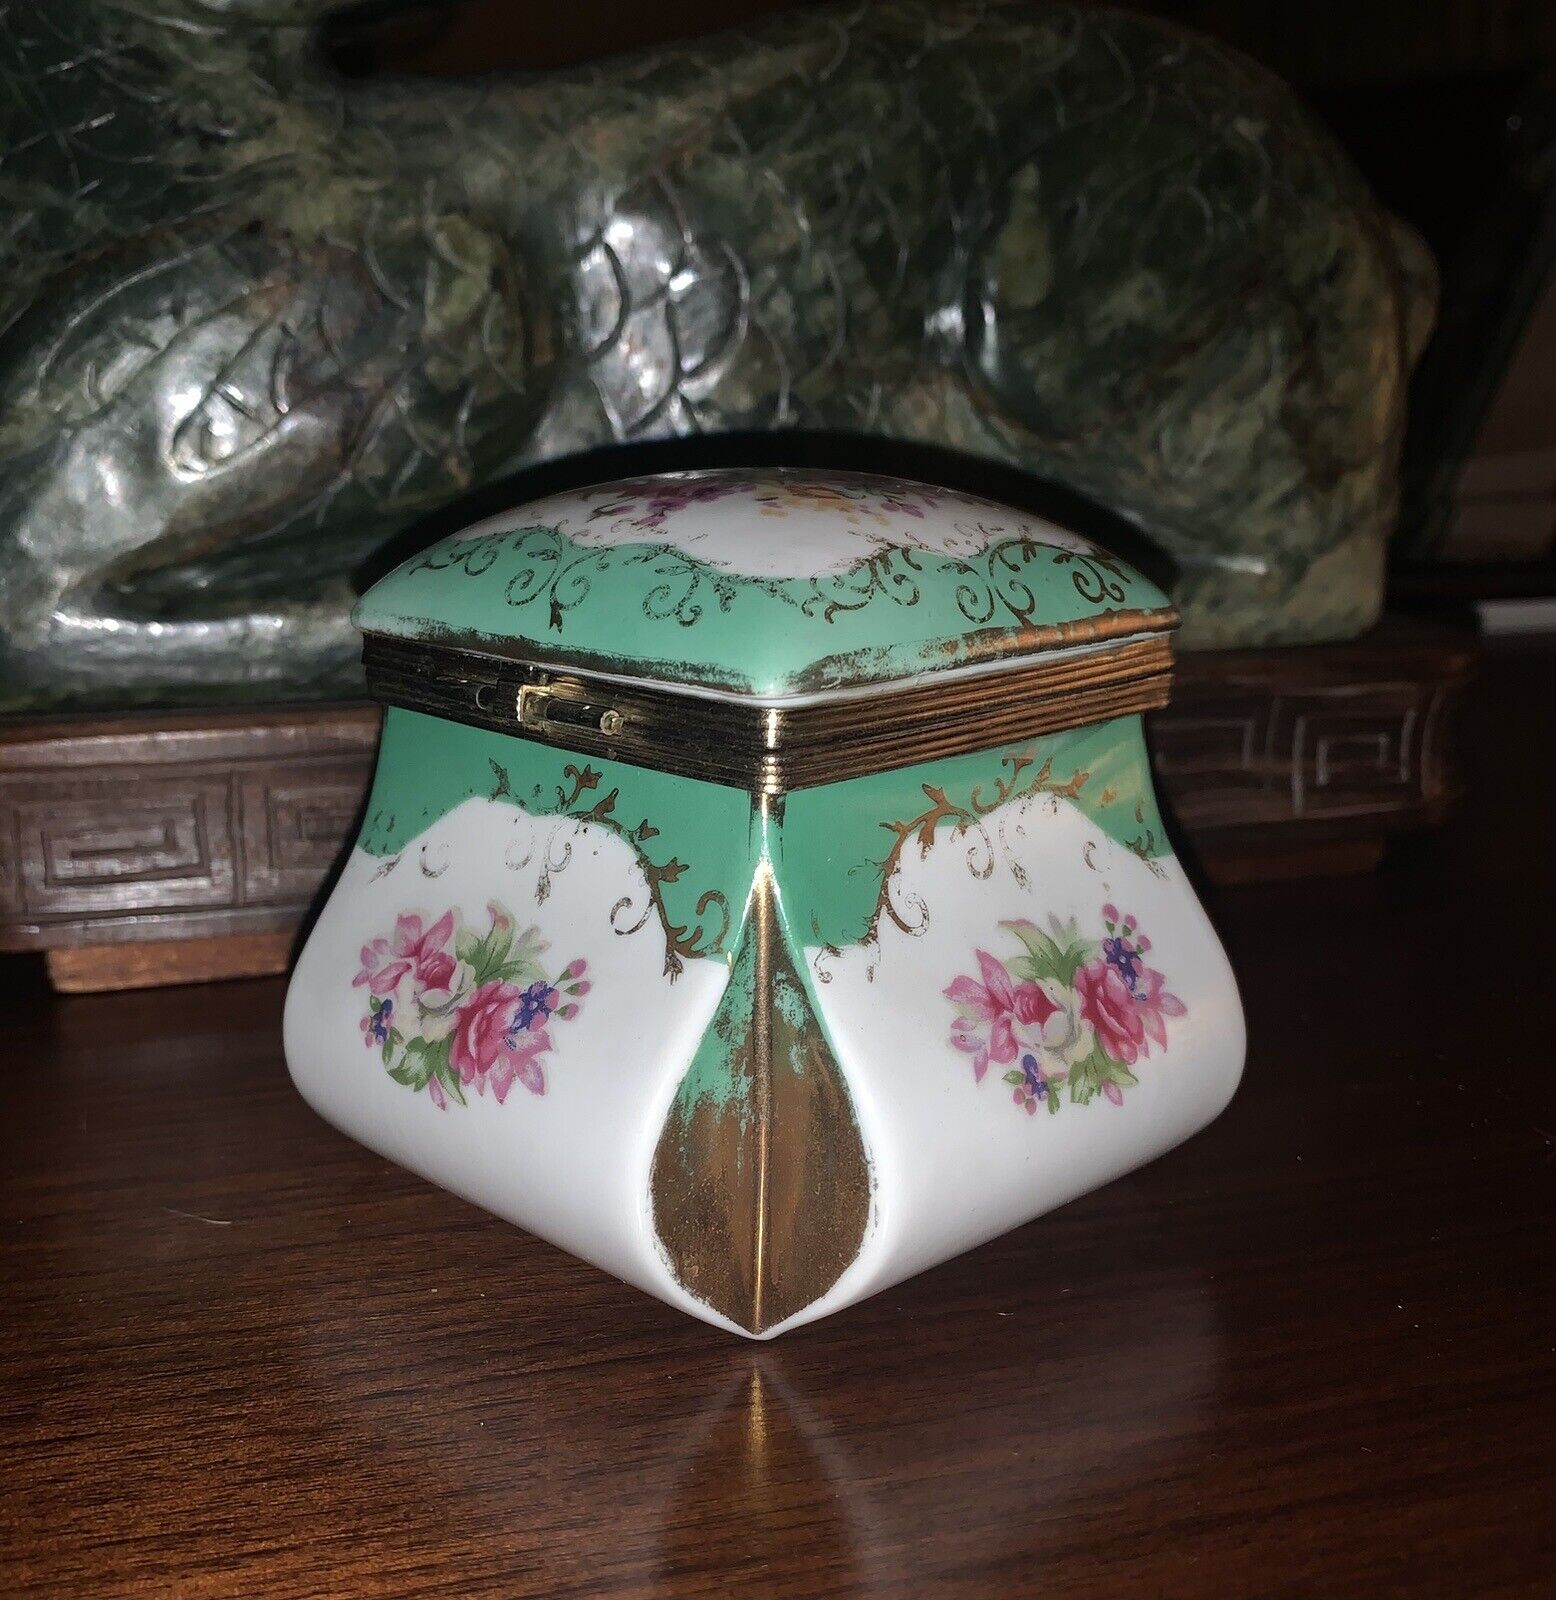 GORGEOUS NOUVEAU HAND PAINTED PORCELAIN JEWELRY BOX HINGED FLORAL GREEN 3.5”x4”